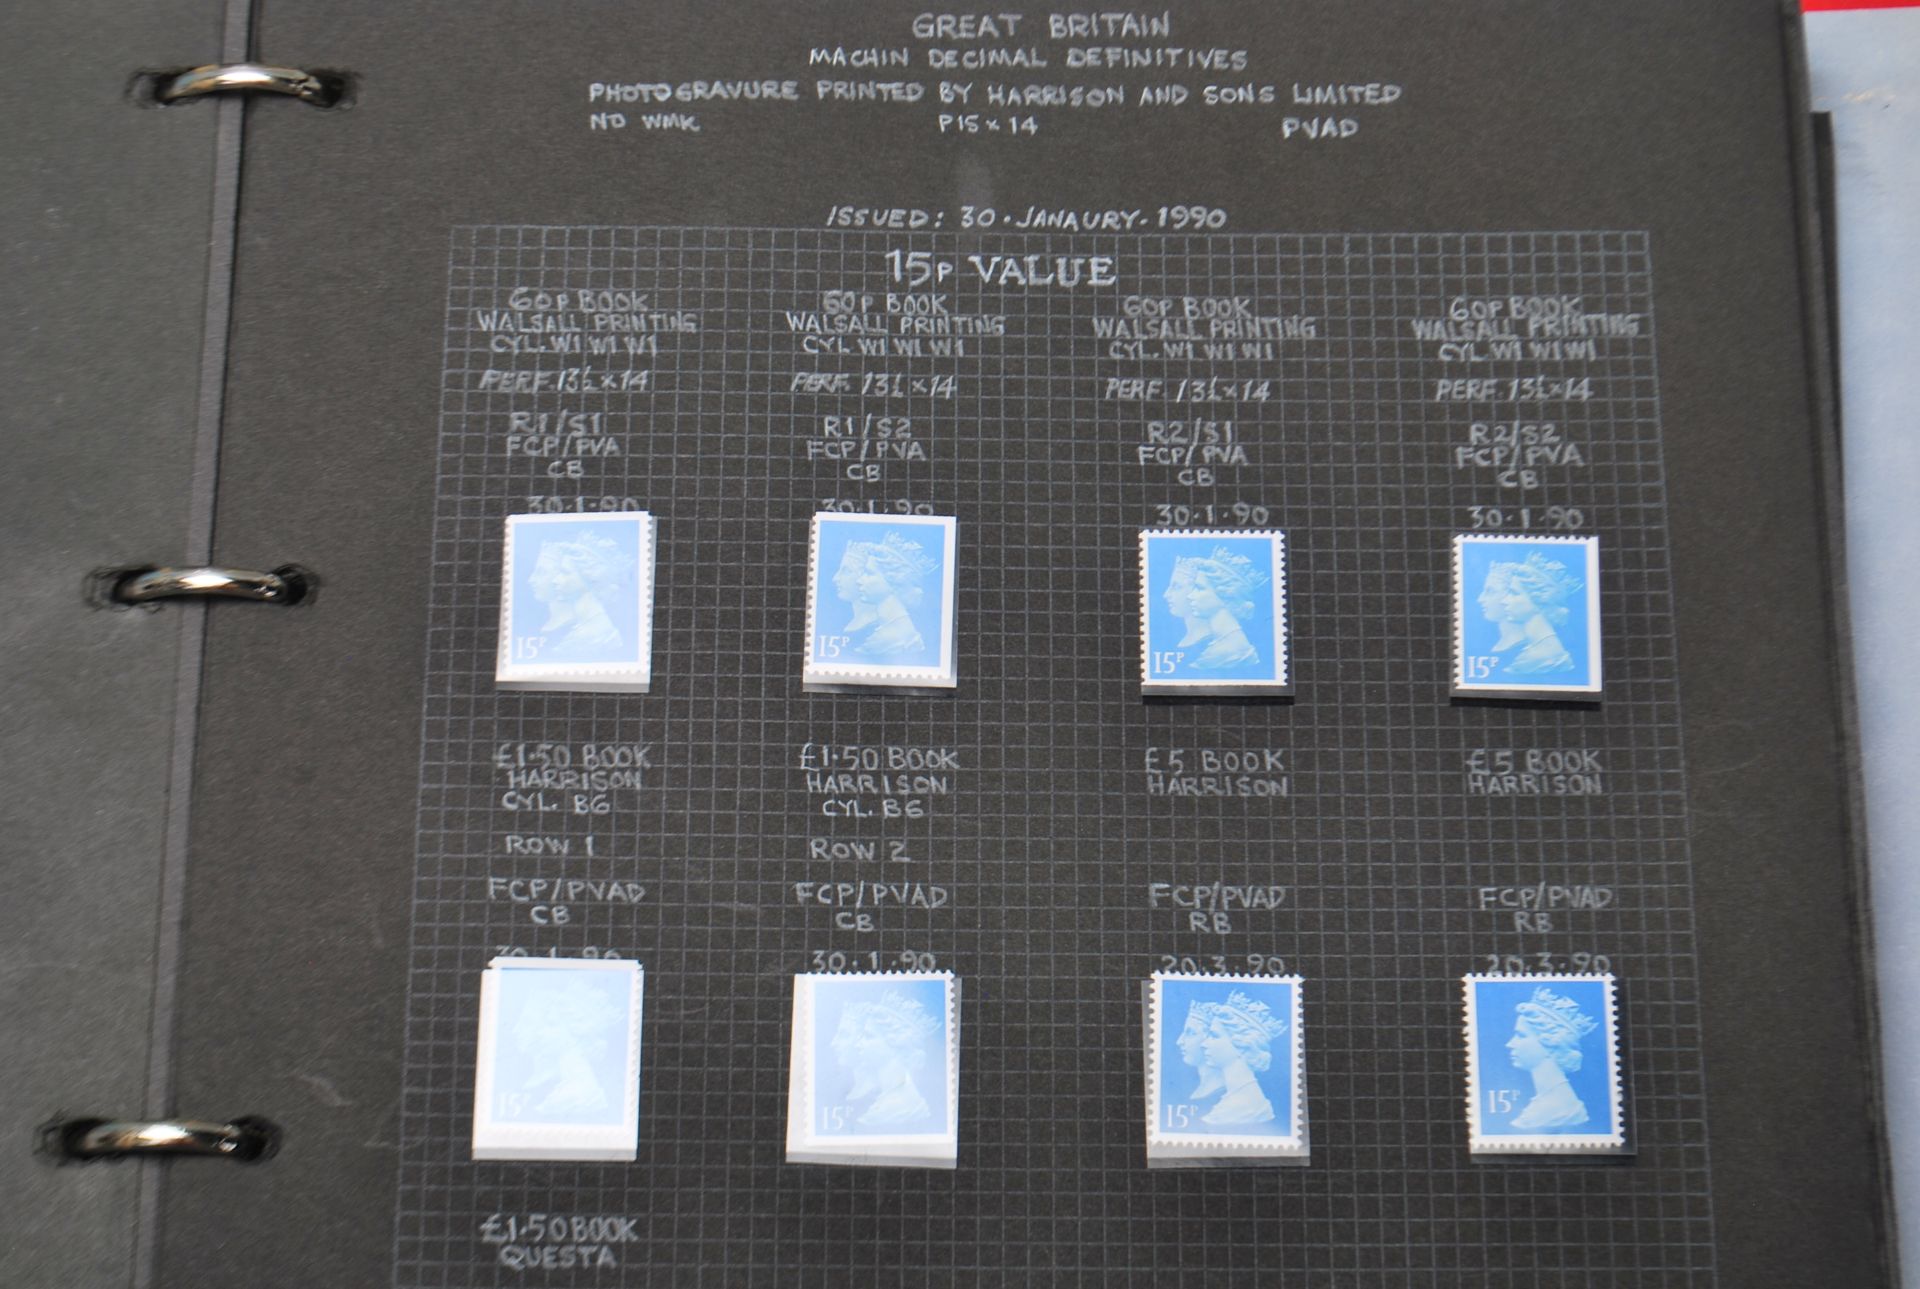 THREE ALBUMS OF MACHIN DEFINITIVE STAMPS + PRESENTATION - Image 19 of 25